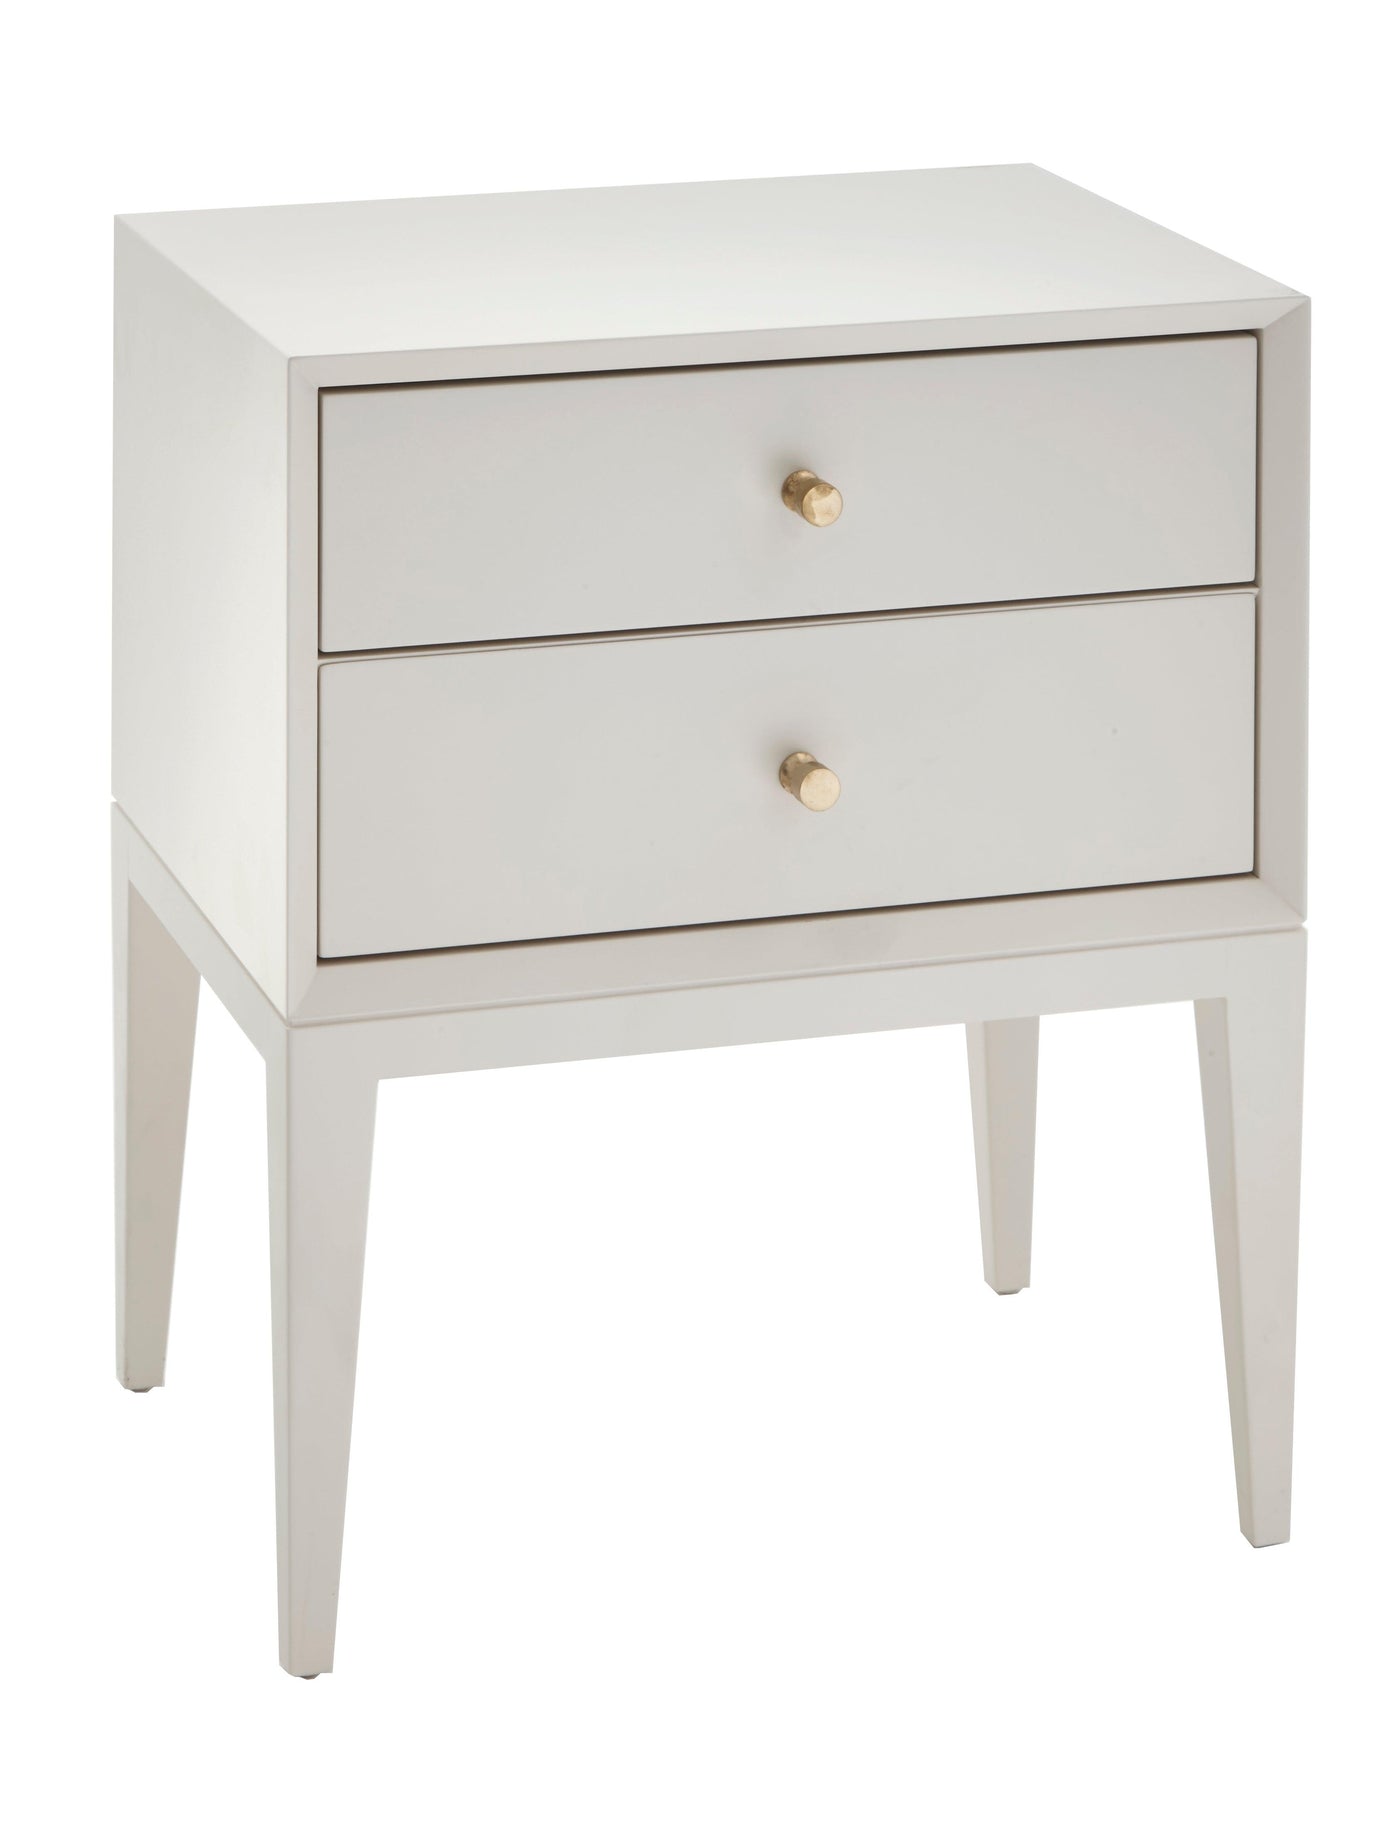 Rv Astley Celaine Side Table With White Wood-Esme Furnishings